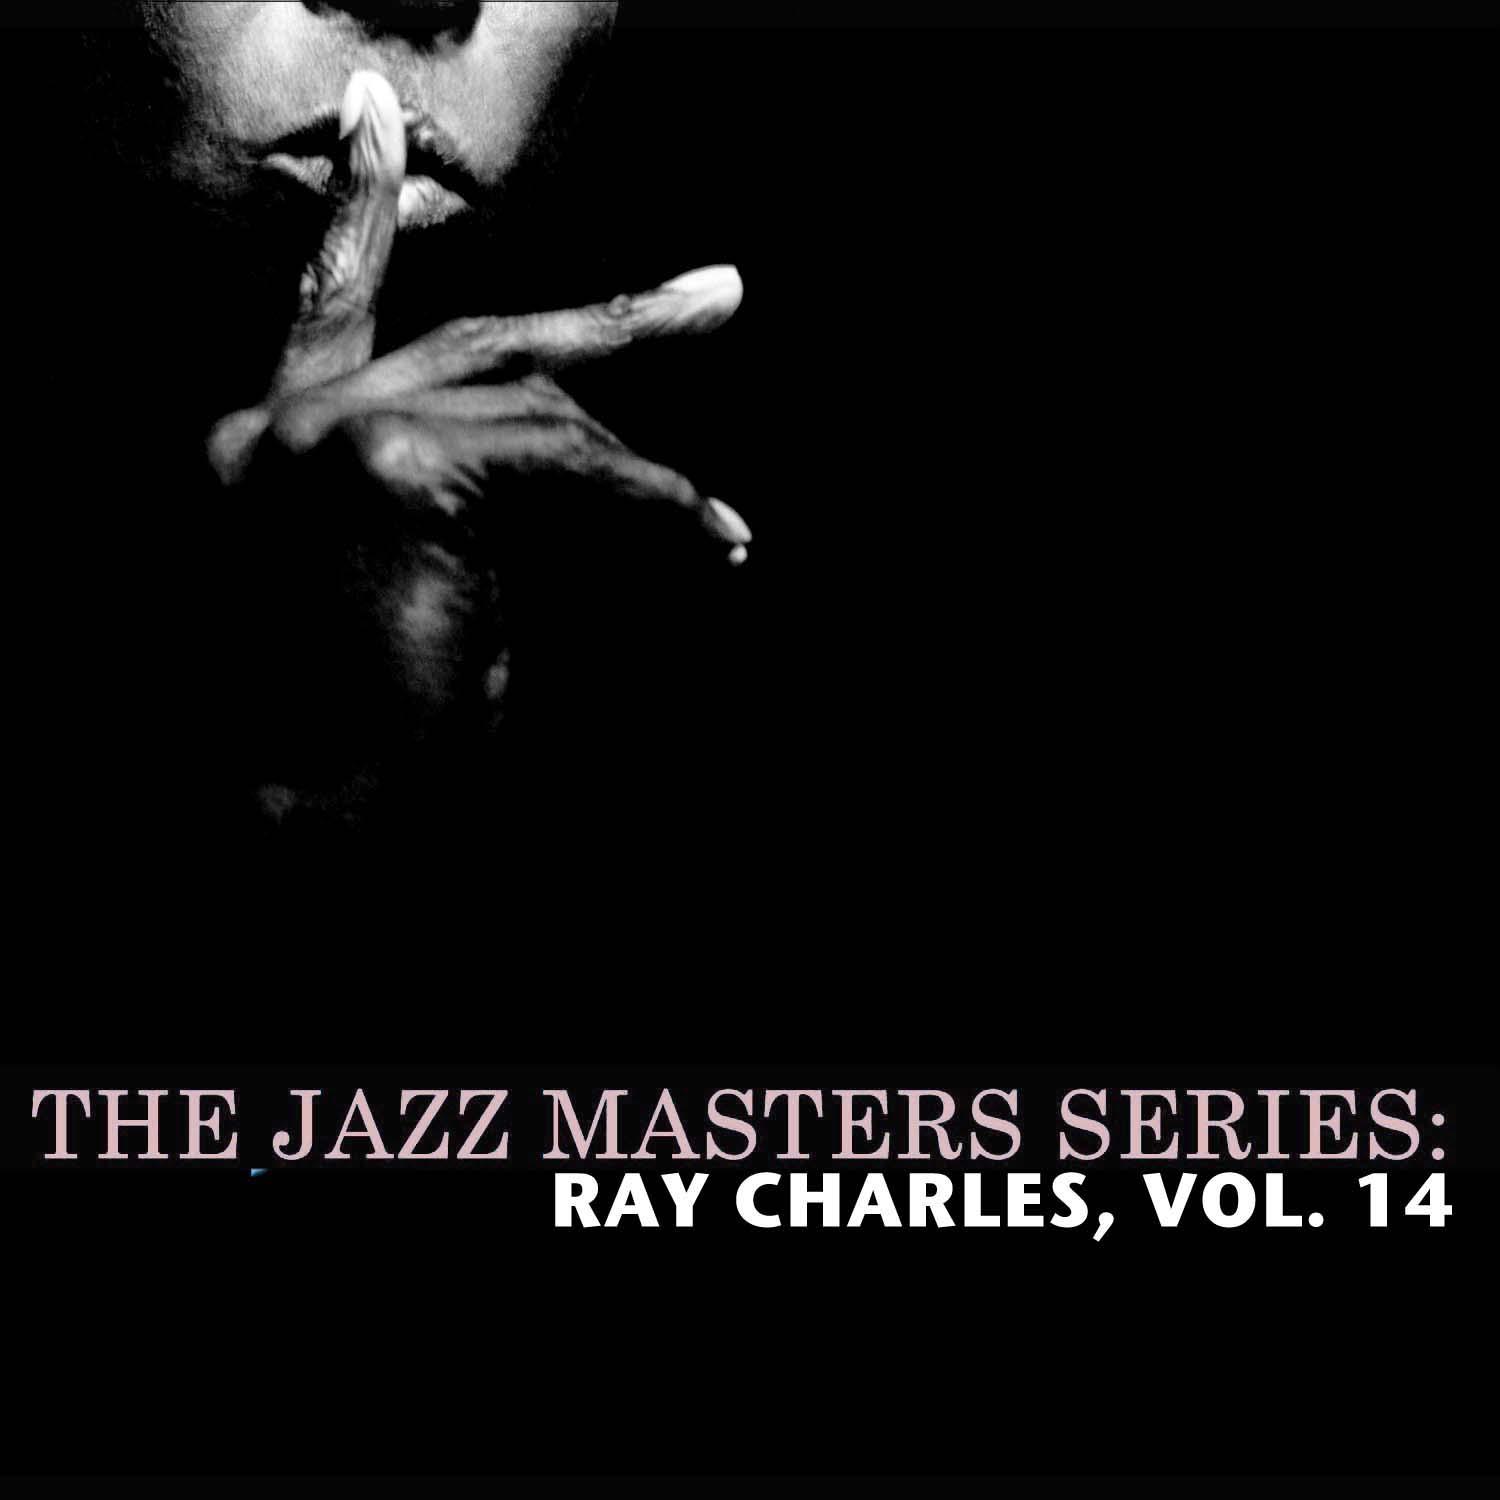 The Jazz Masters Series: Ray Charles, Vol. 14